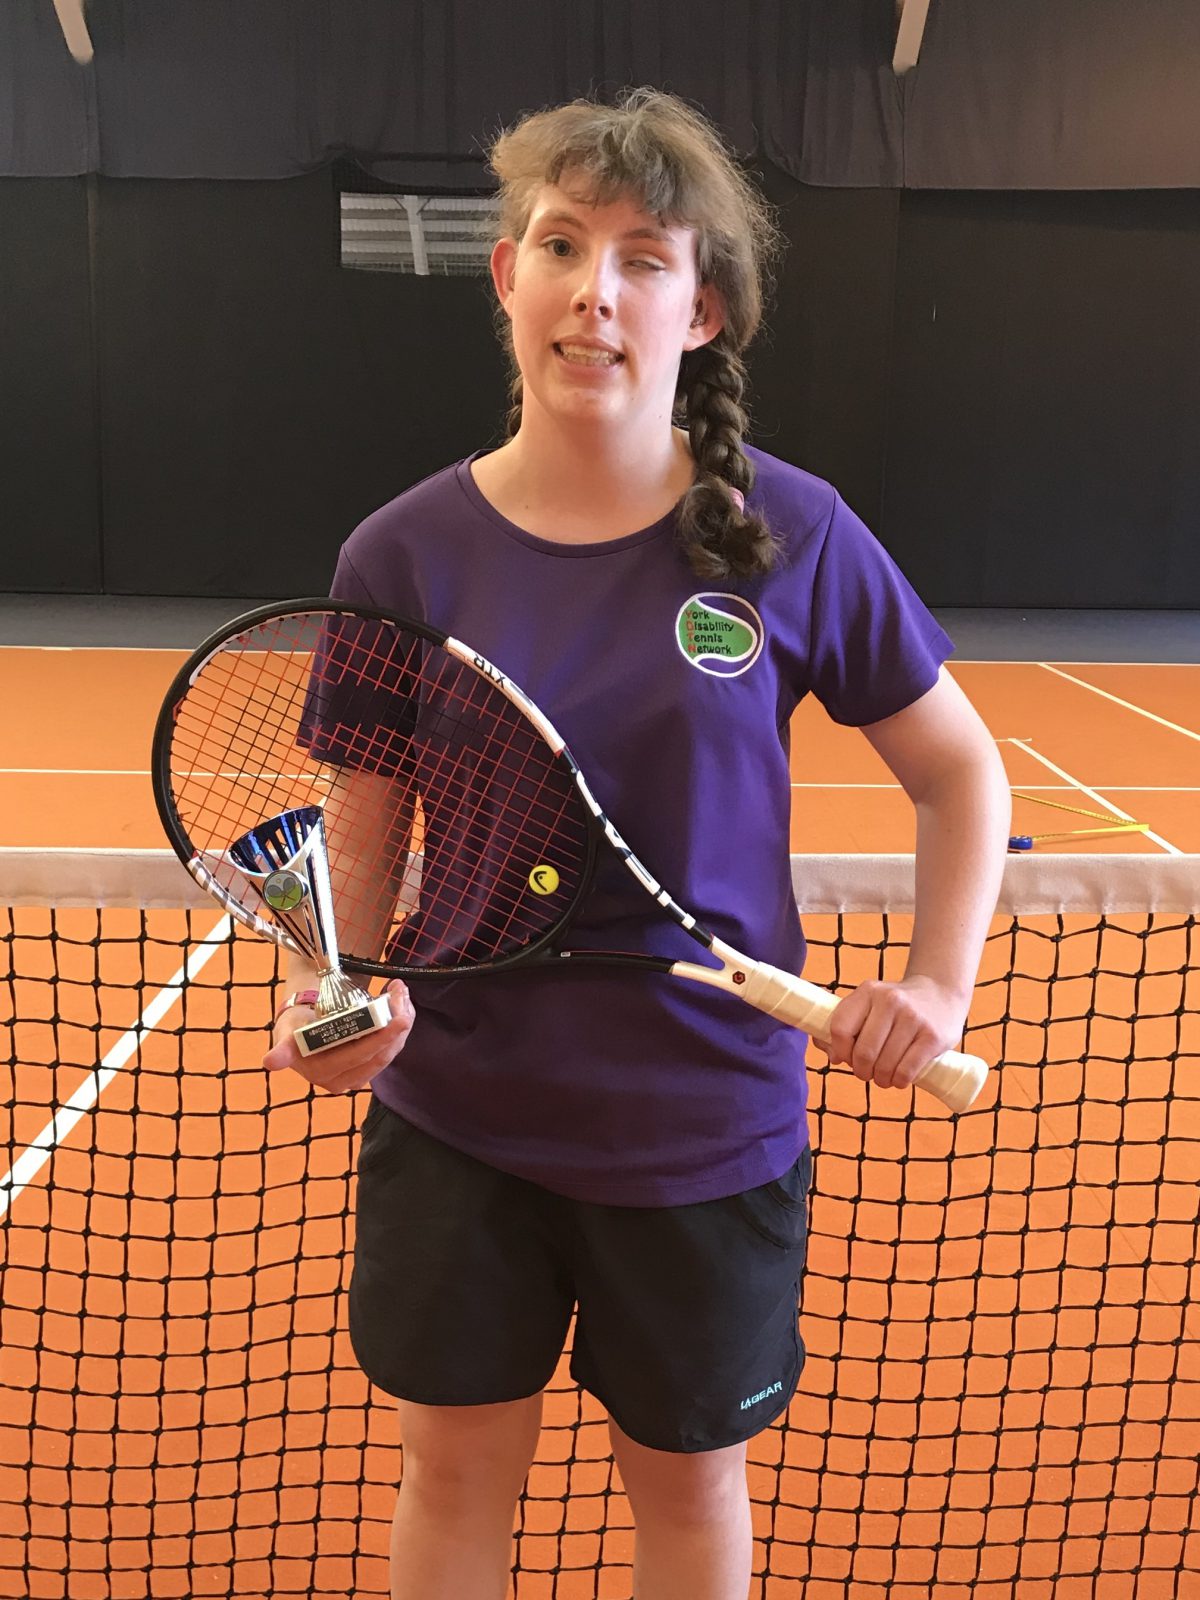 Lydia Wrightson holding a tennis racket in a tennis court, holding one of her awards.